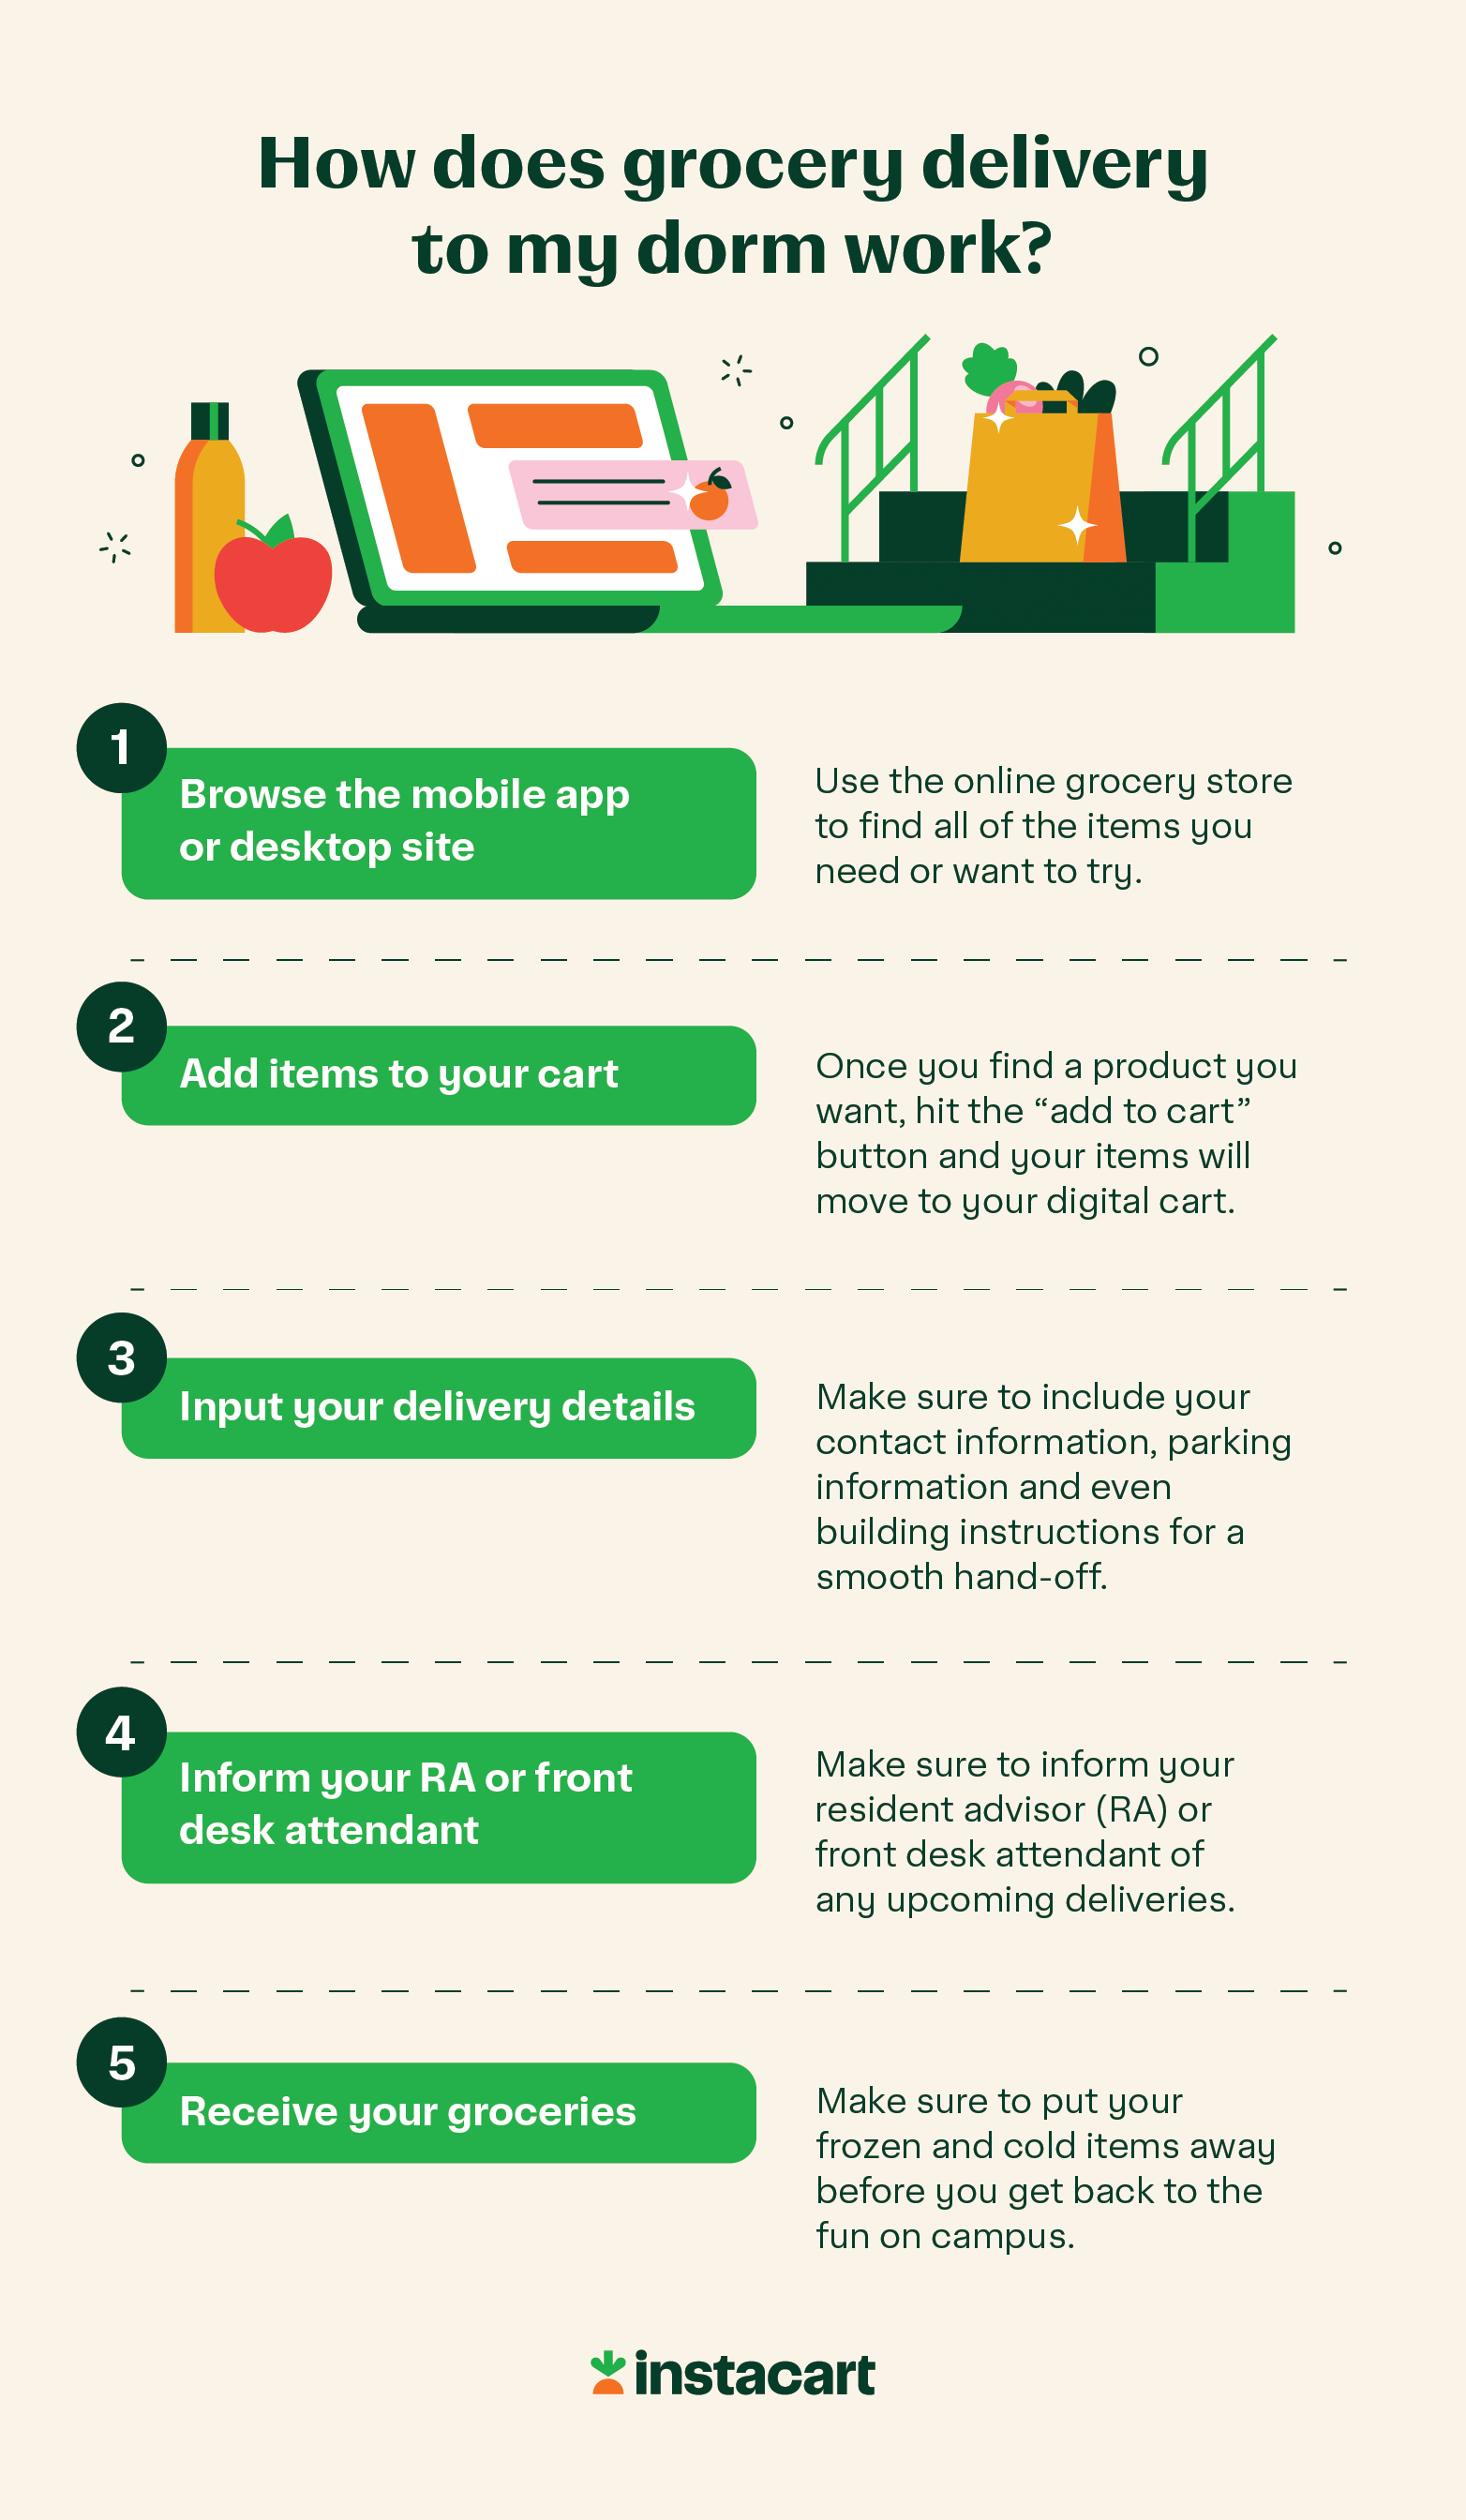 illustration showing how grocery delivery to a dorm works